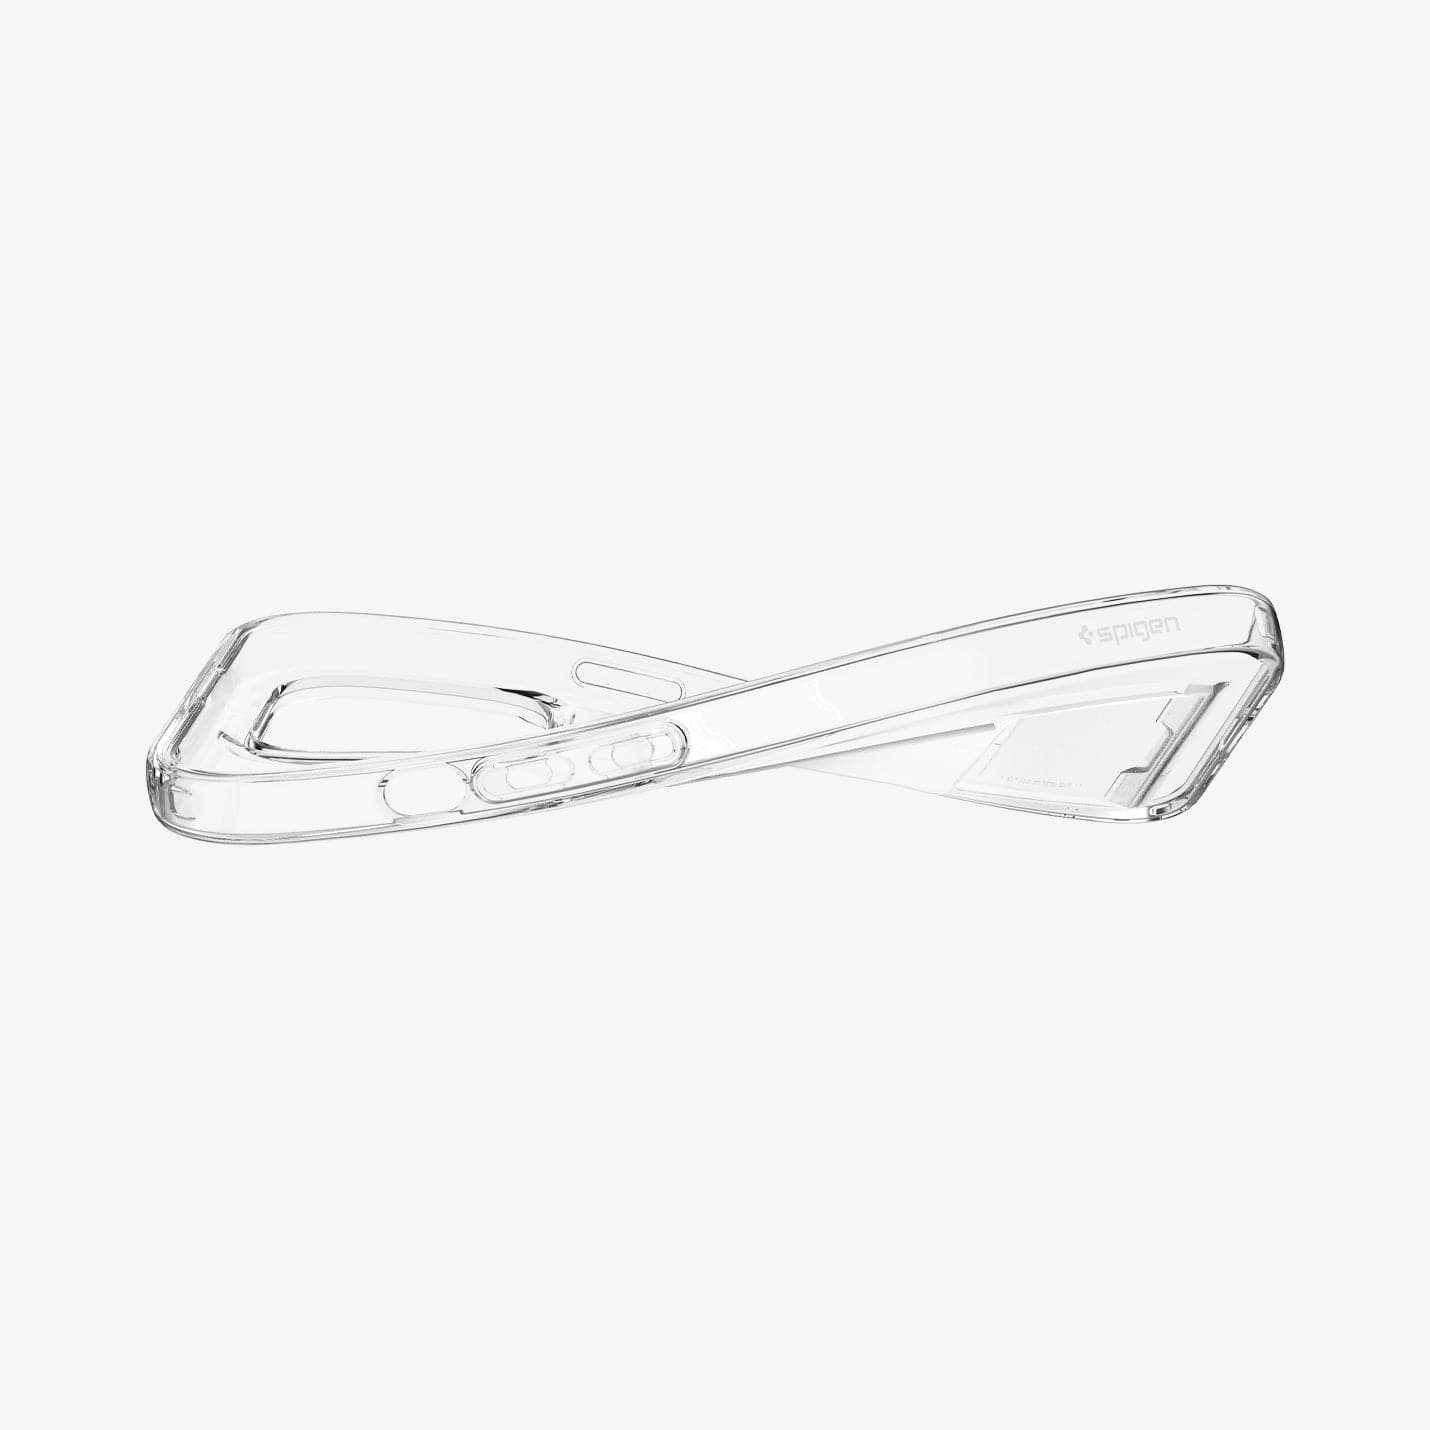 ACS04832 - iPhone 14 Pro Max Case Crystal Slot in crystal clear showing the case bending to show the flexibility